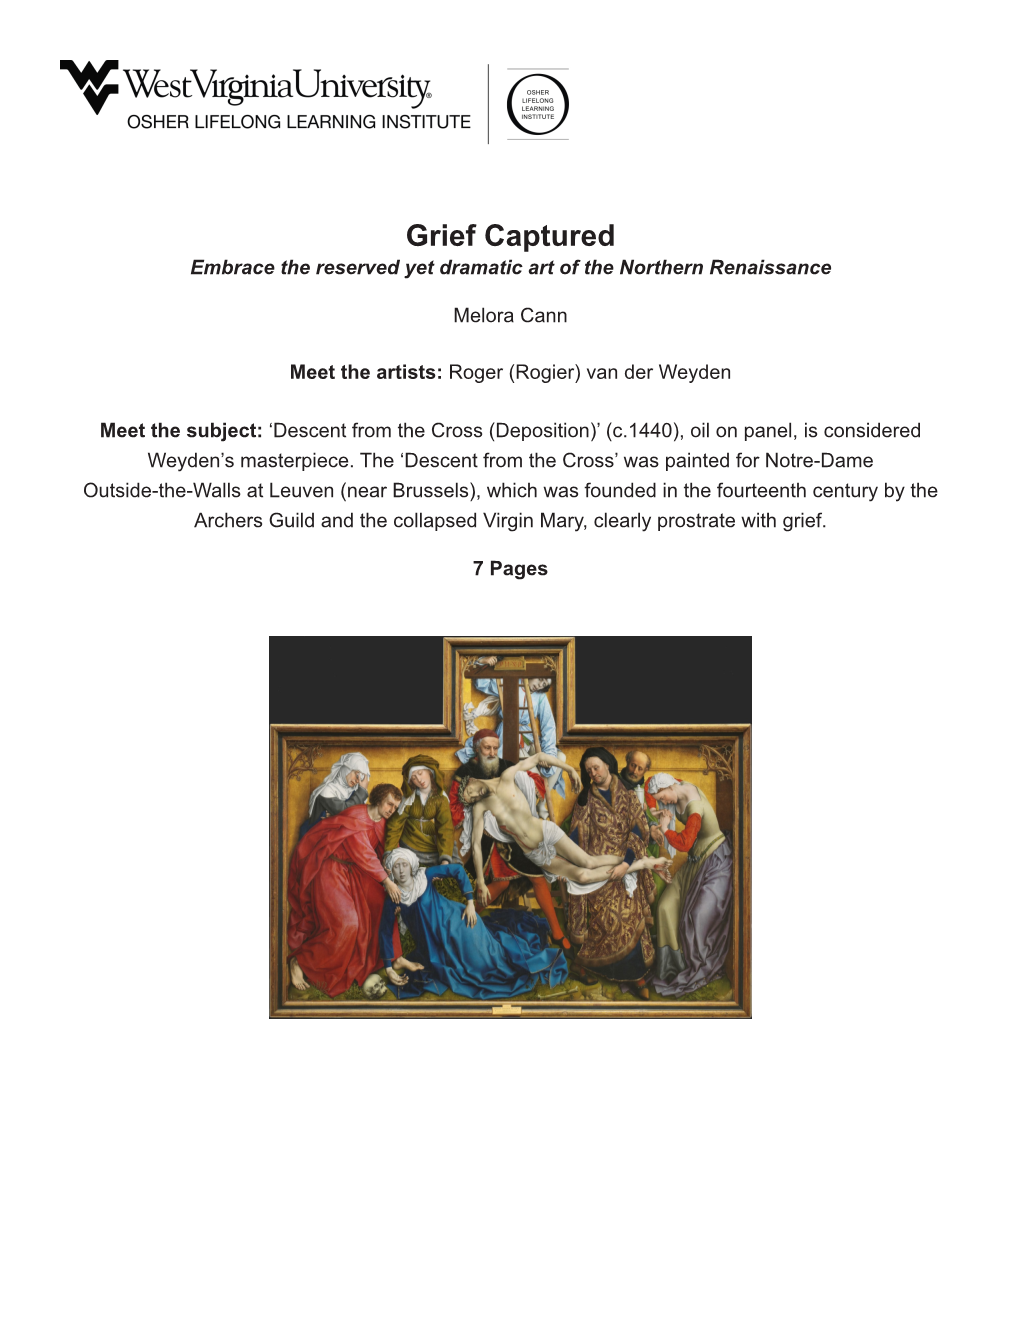 Grief Captured Embrace the Reserved Yet Dramatic Art of the Northern Renaissance